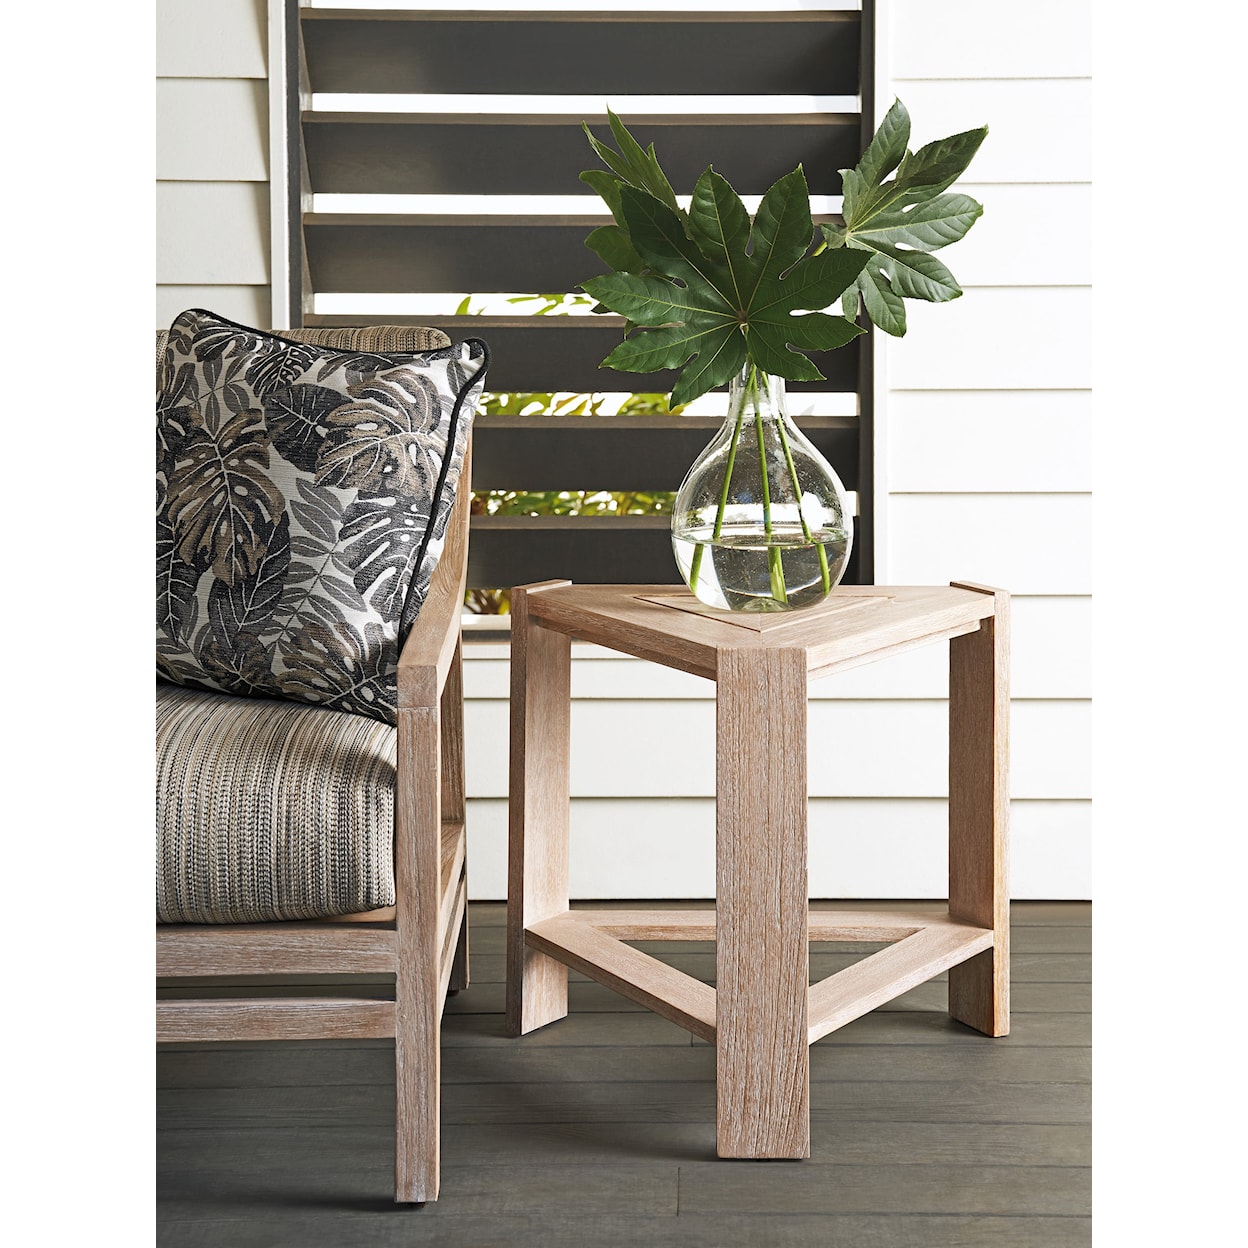 Tommy Bahama Outdoor Living Stillwater Cove Triangular End Table